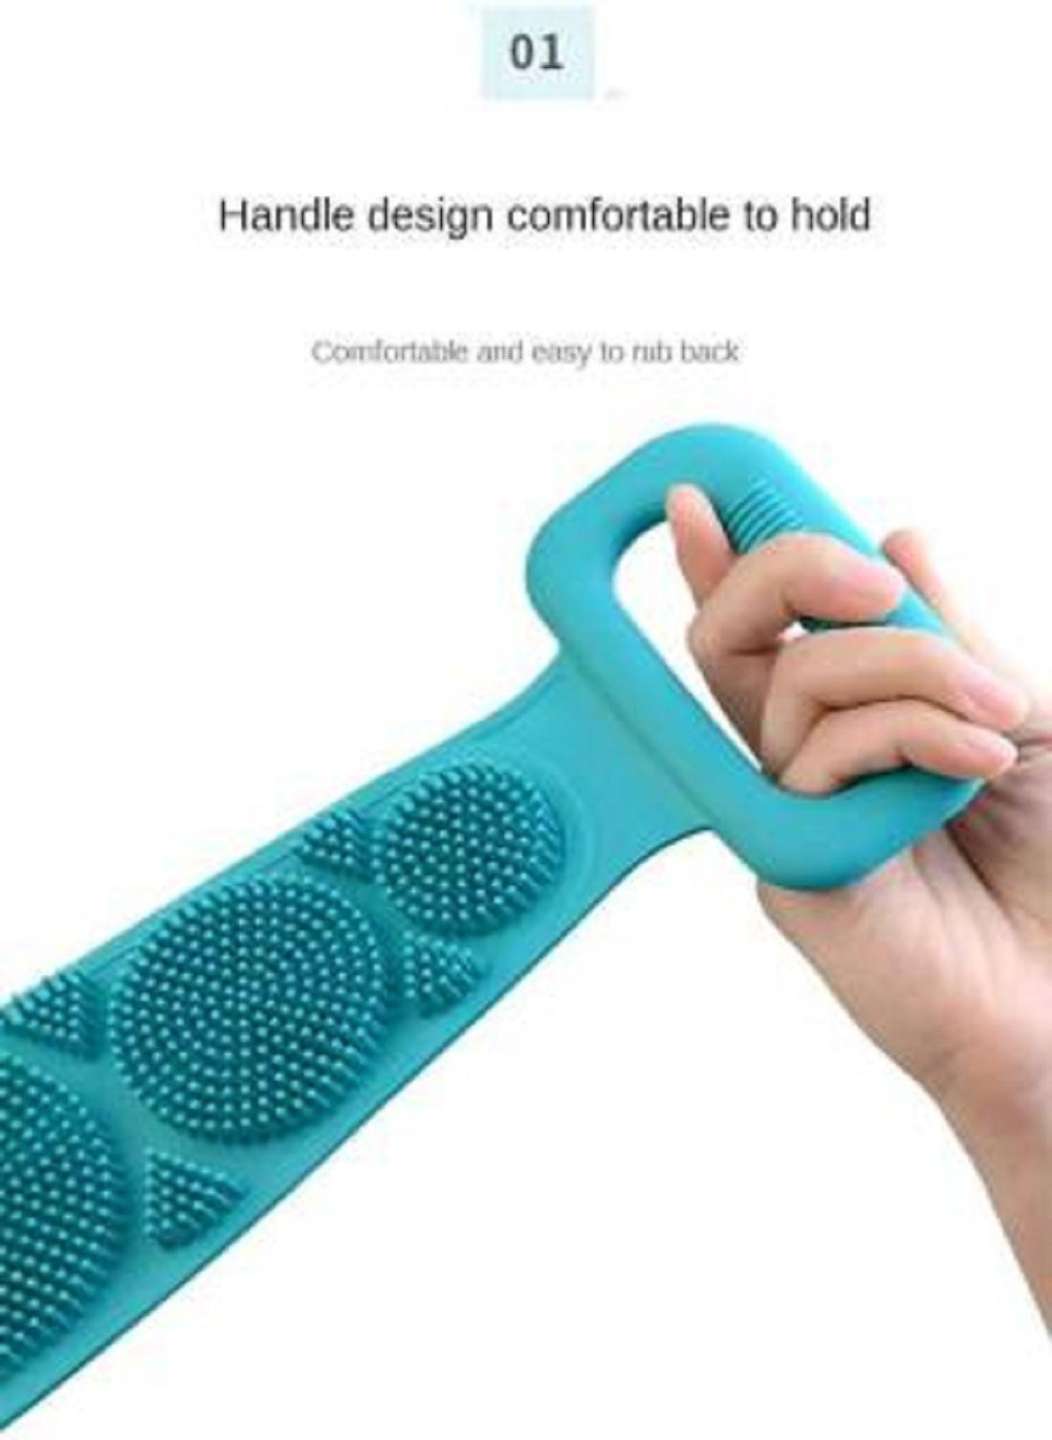 🤩Silicone Double side Body Back Scrubber and Bathing Brush🤩